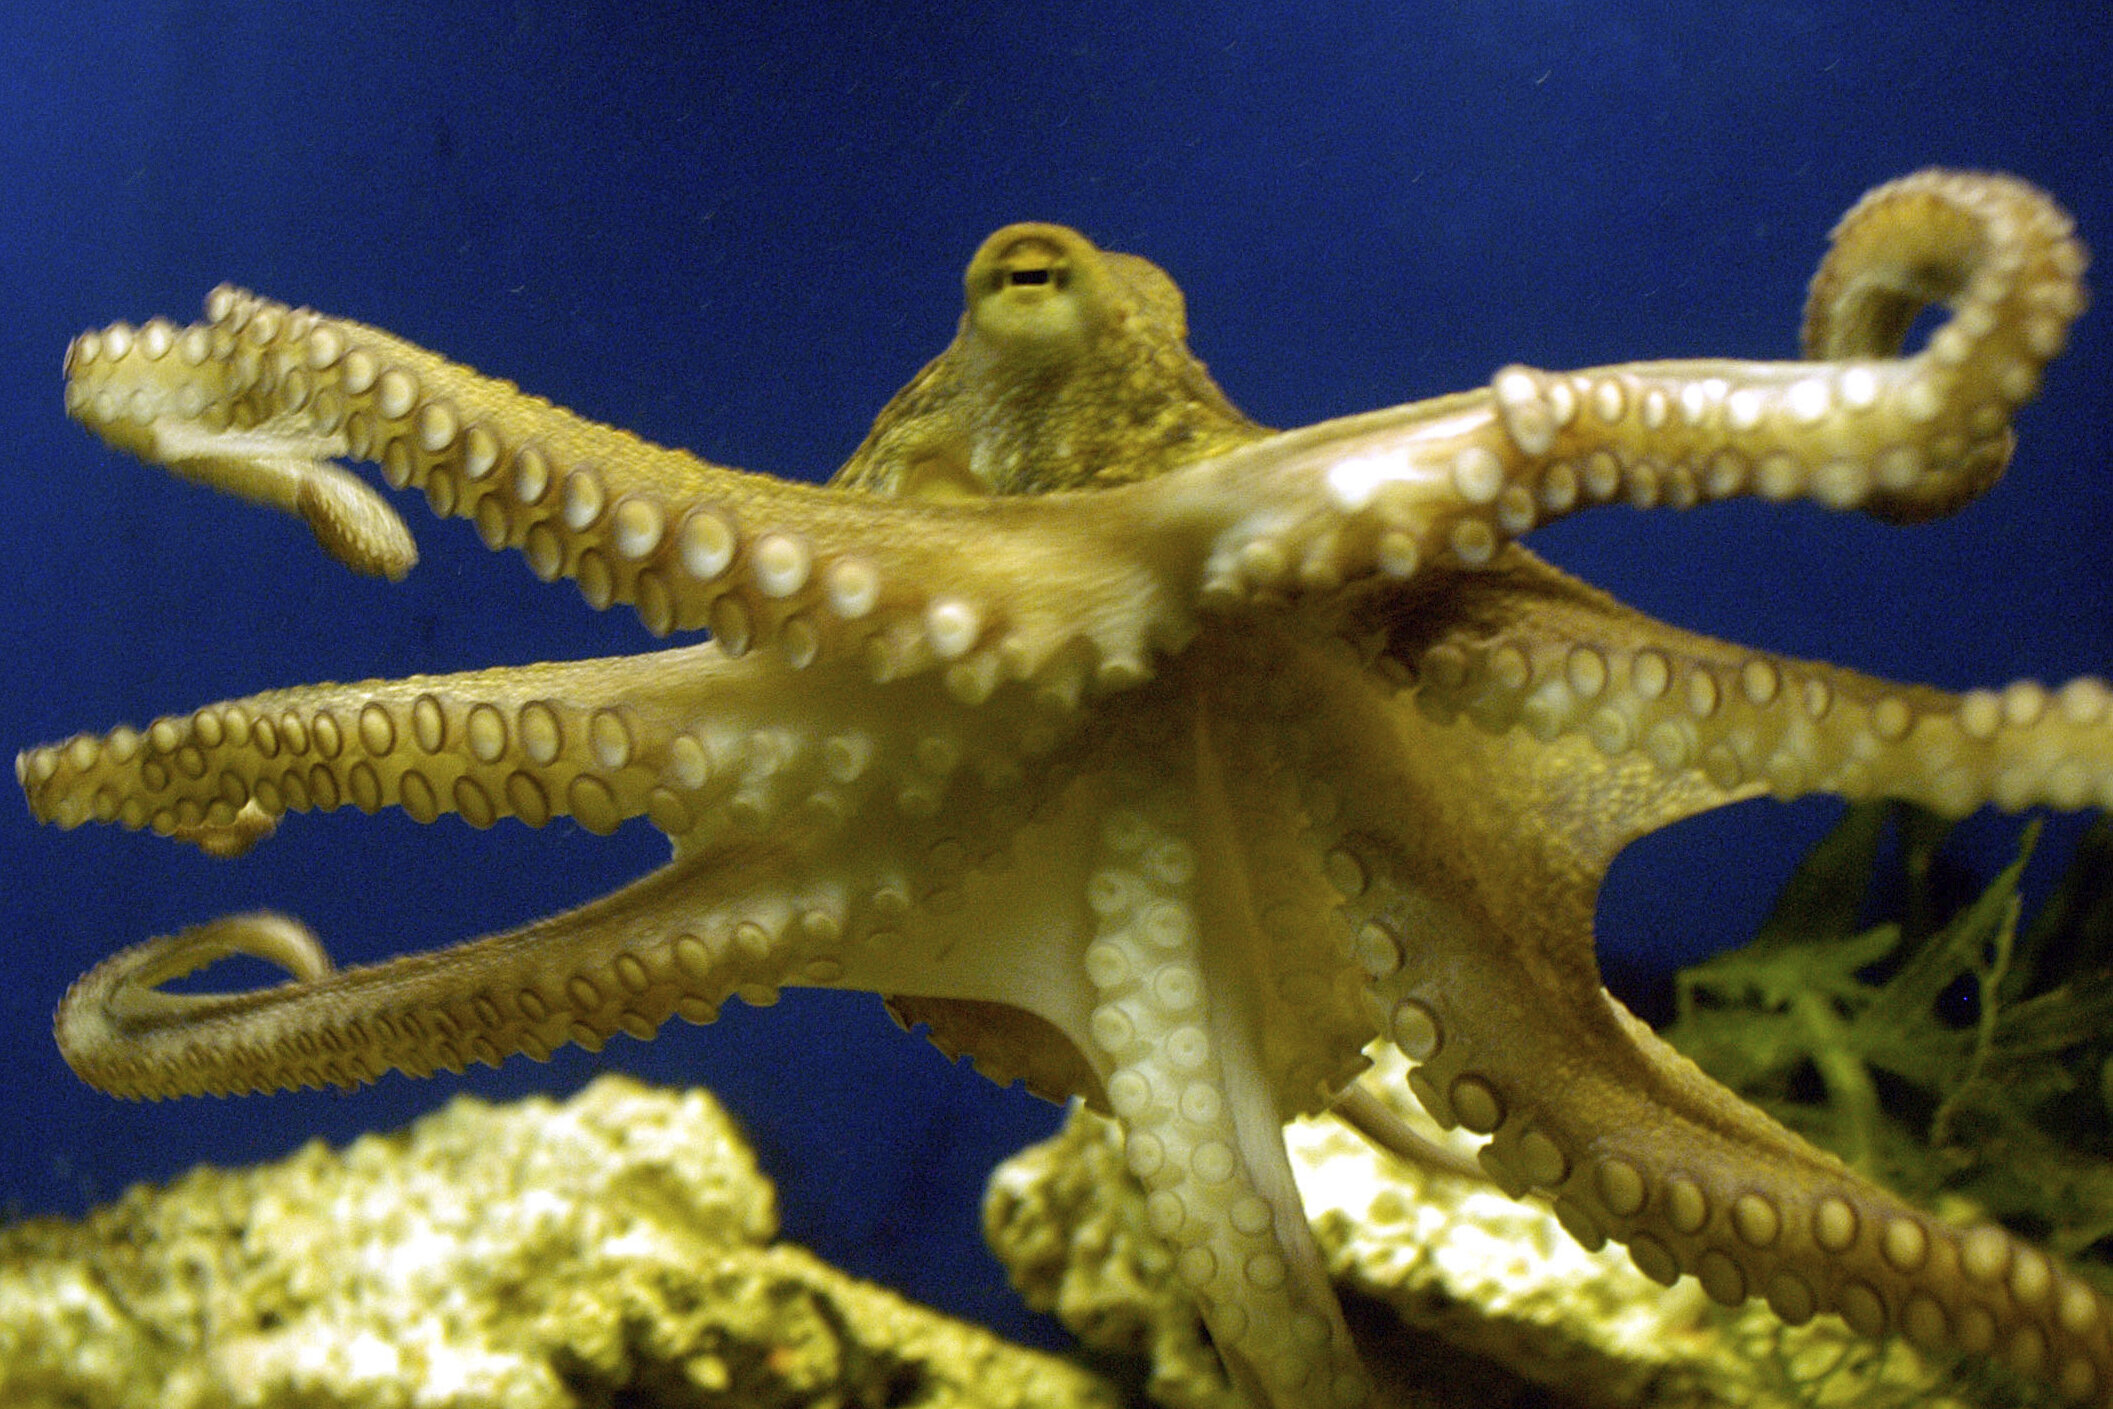 #Octopus ancestors lived before era of dinosaurs, study shows